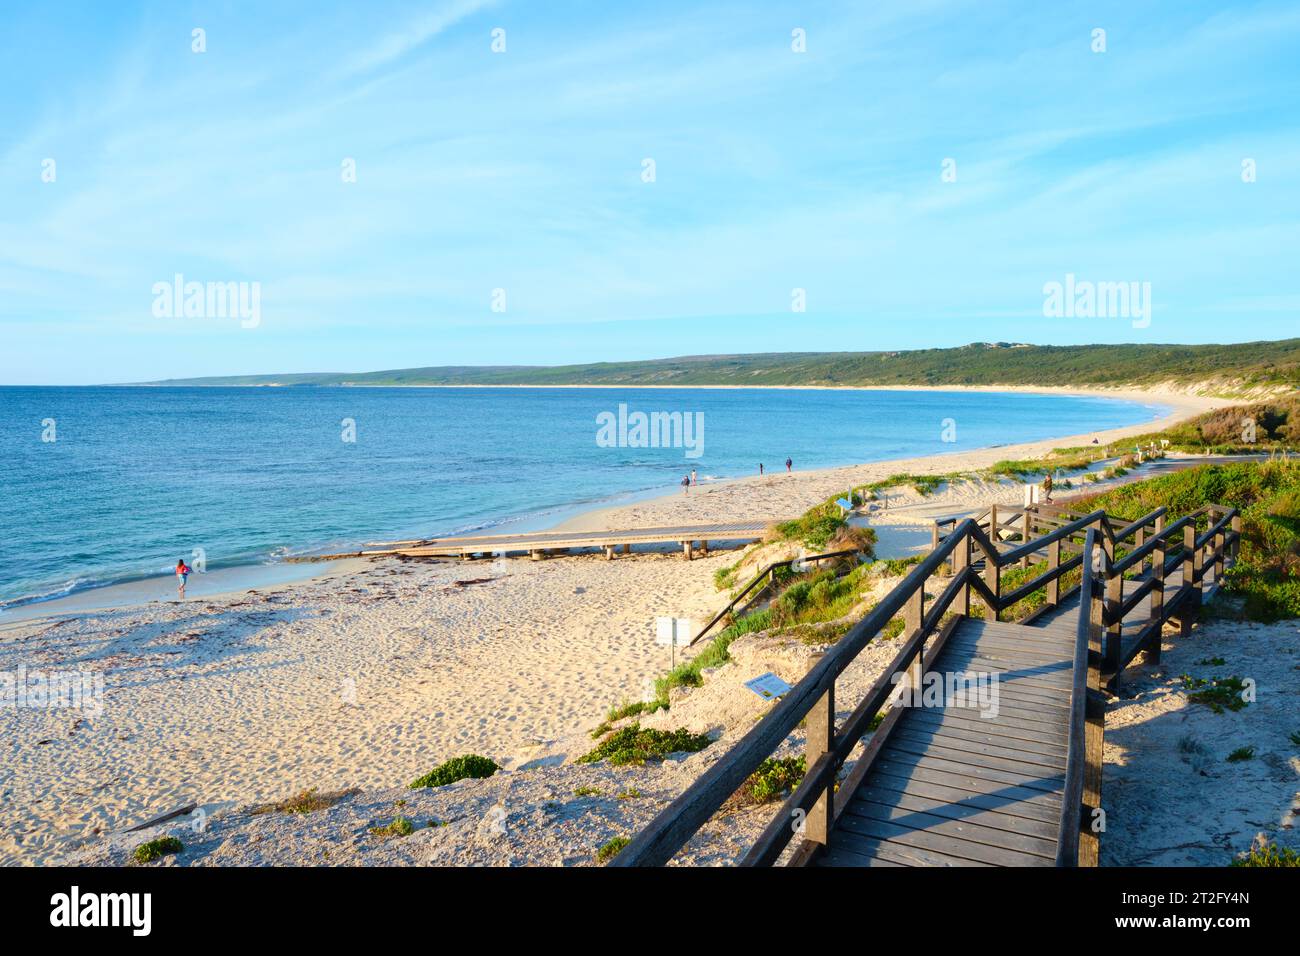 A view across Hamelin Bay in late afternoon light in the south-west region of Western Australia. Stock Photo